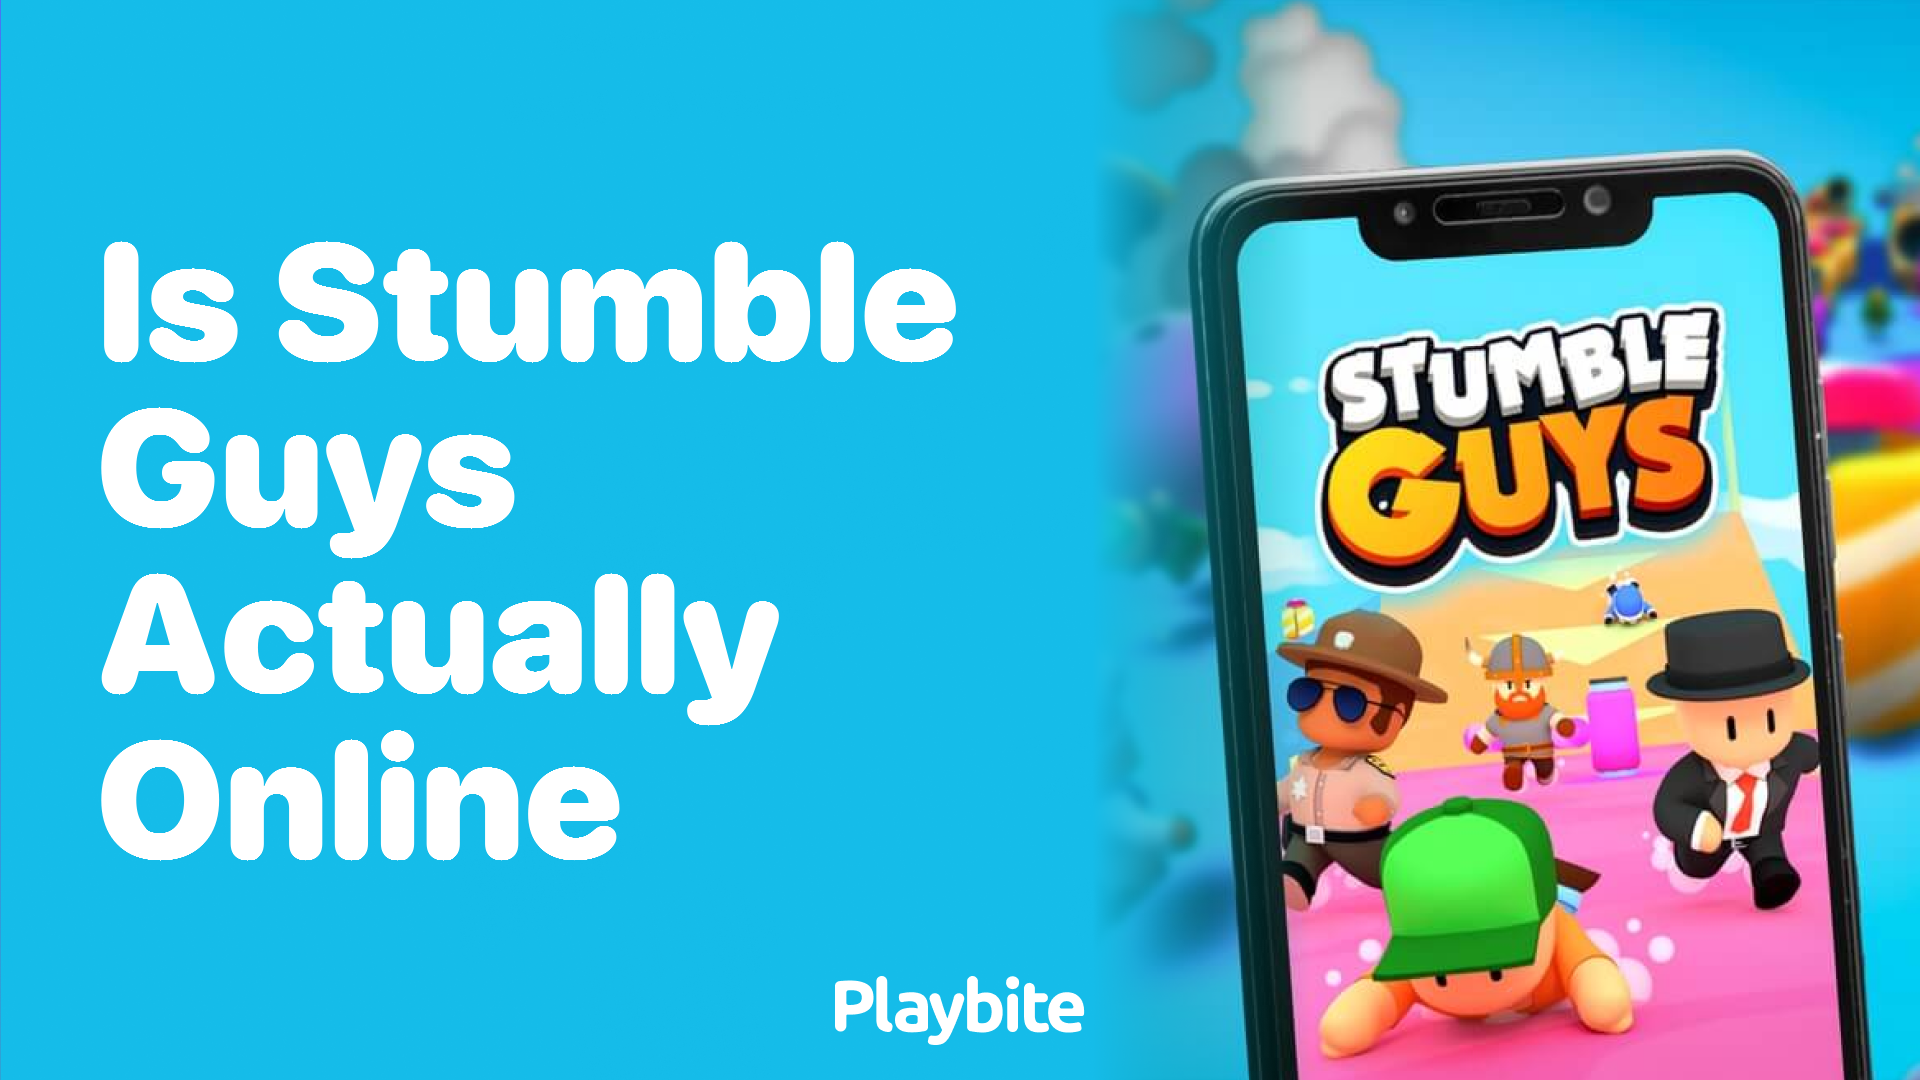 Is Stumble Guys Actually Online? Unveiling the Truth